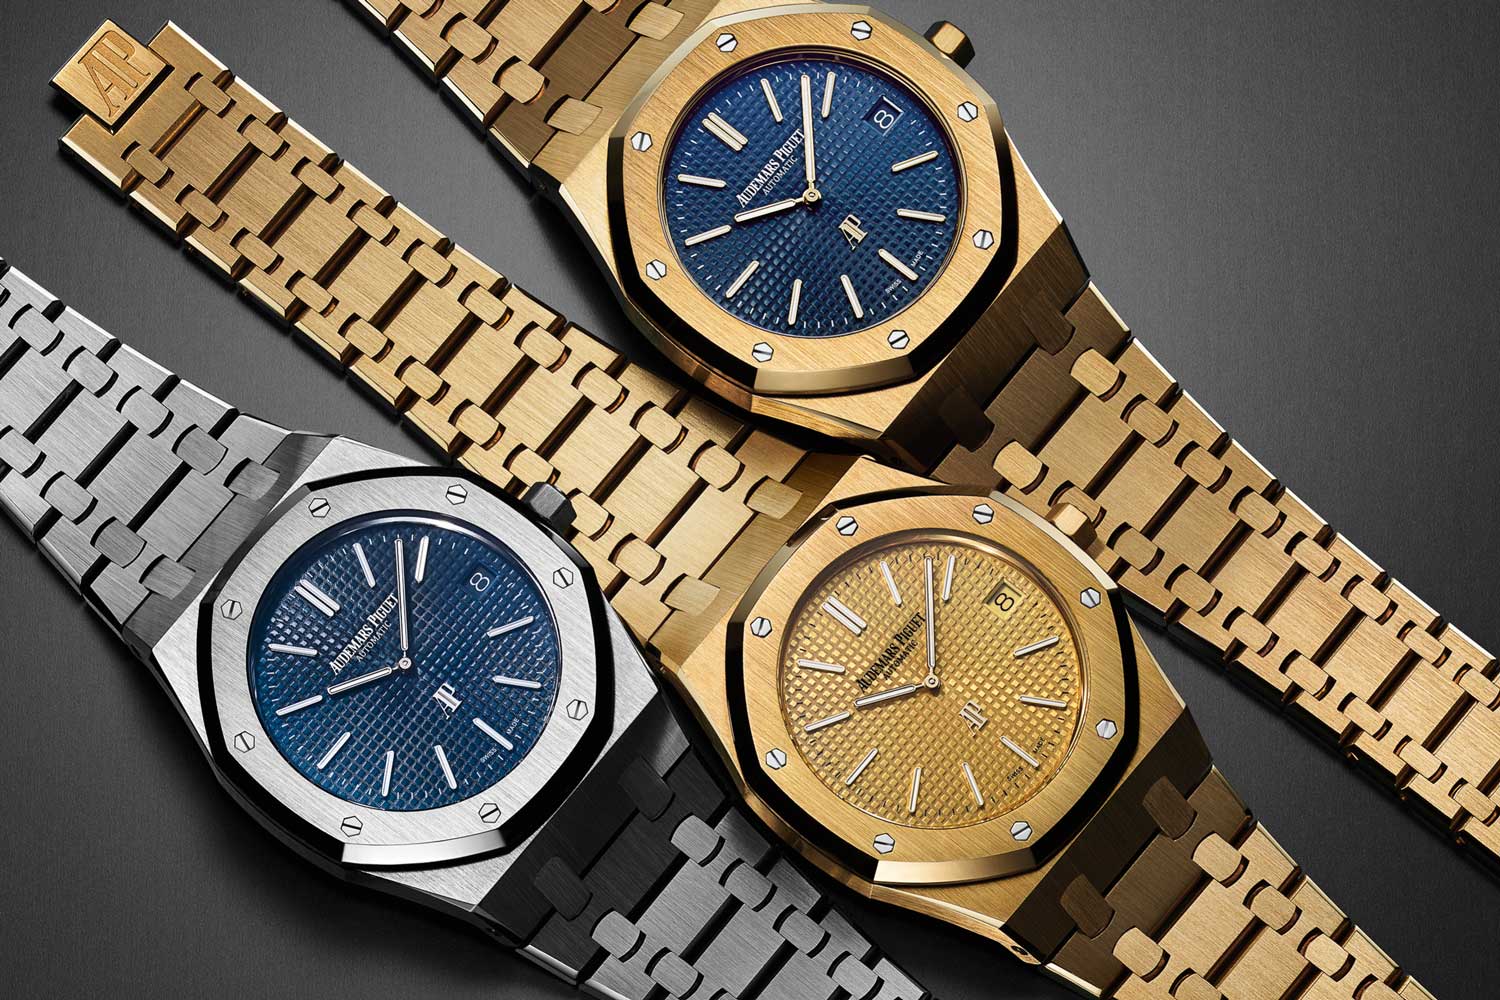 Three varying executions of the 39mm Royal Oak 15202, the reference that most closely resembles the 1972 5402ST